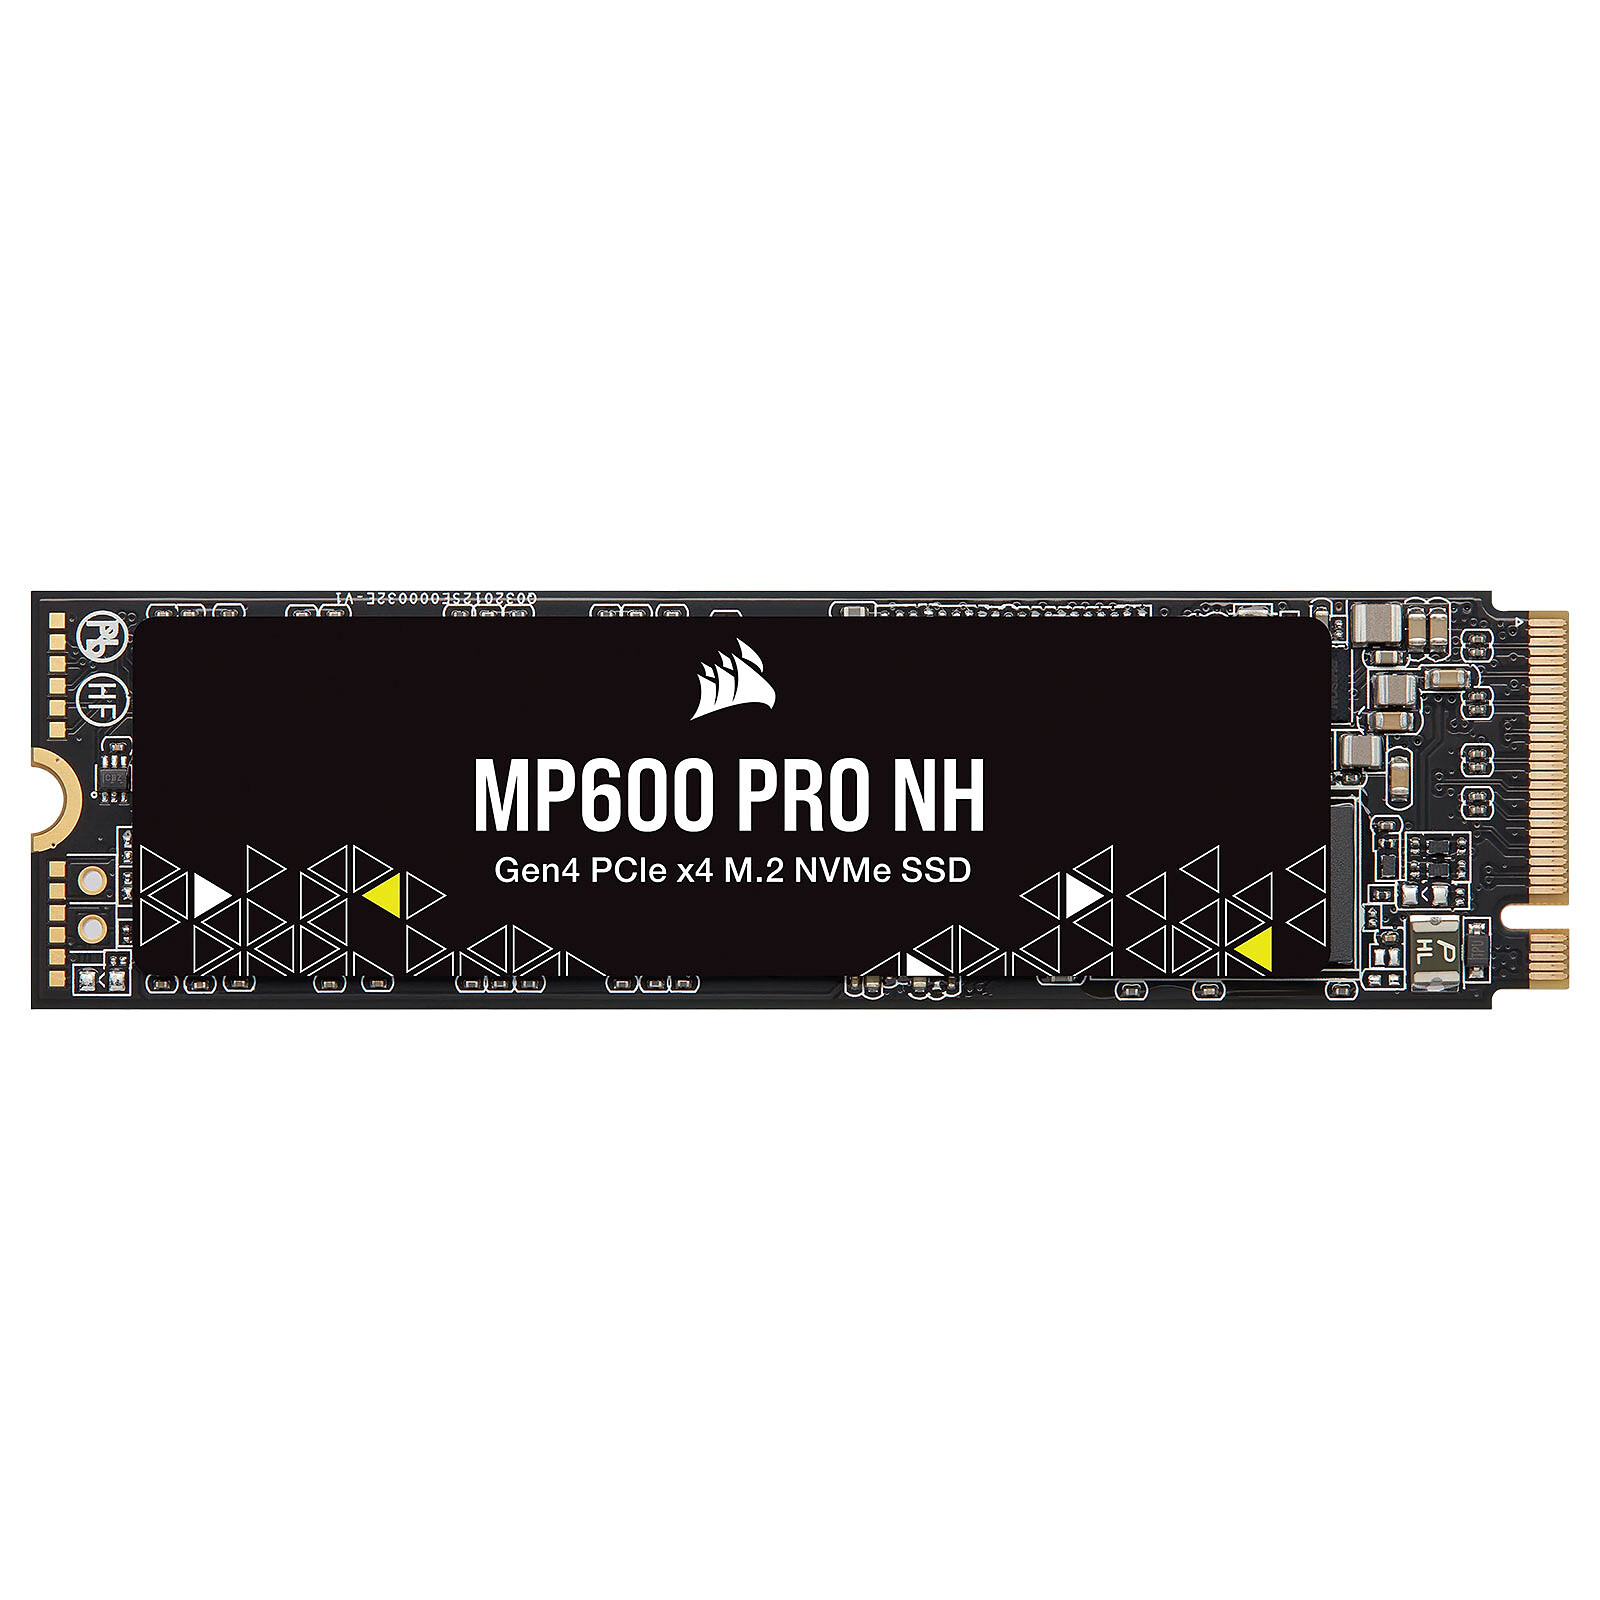 Samsung SSD 980 PRO M.2 PCIe NVMe 1 To - Disque SSD - LDLC